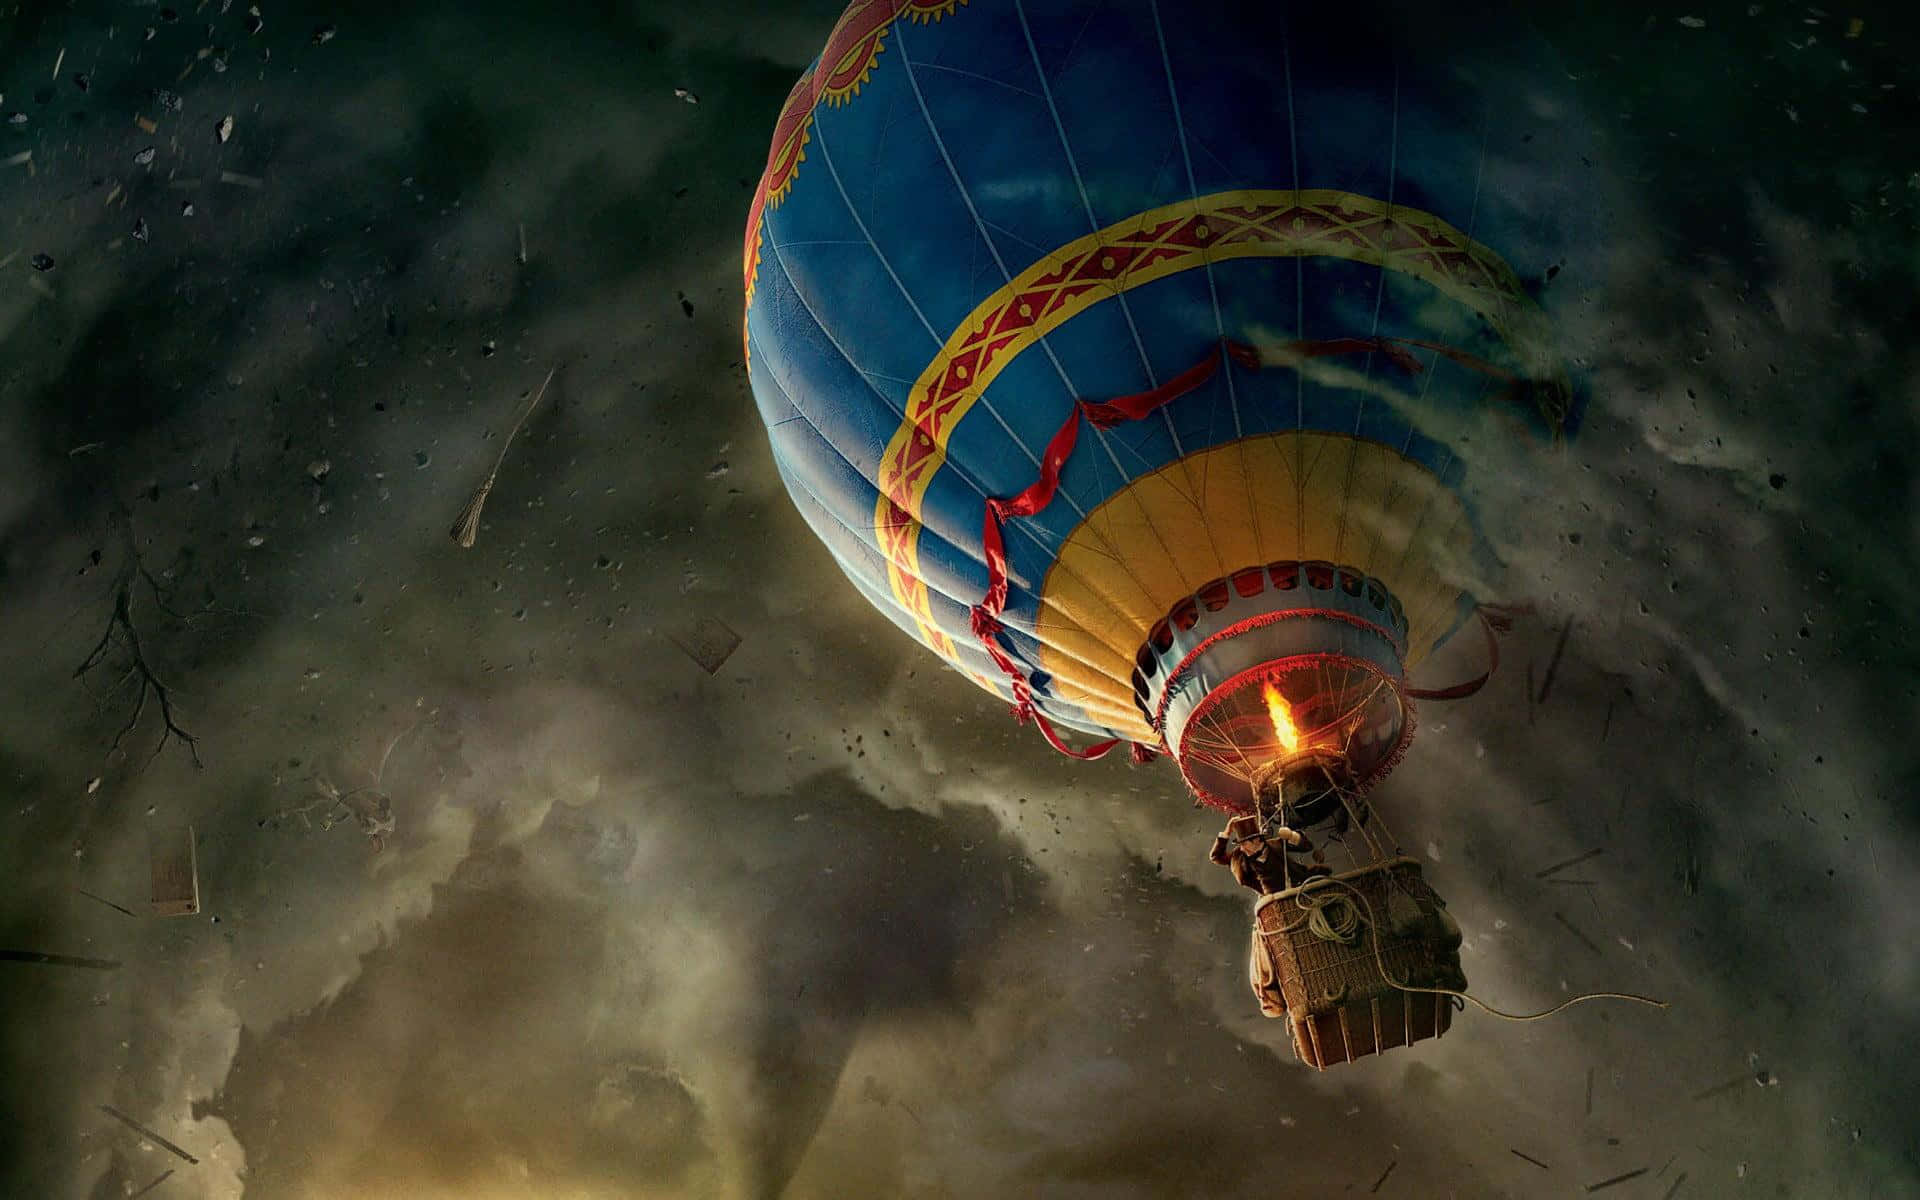 Soar above the clouds with a hot air balloon ride